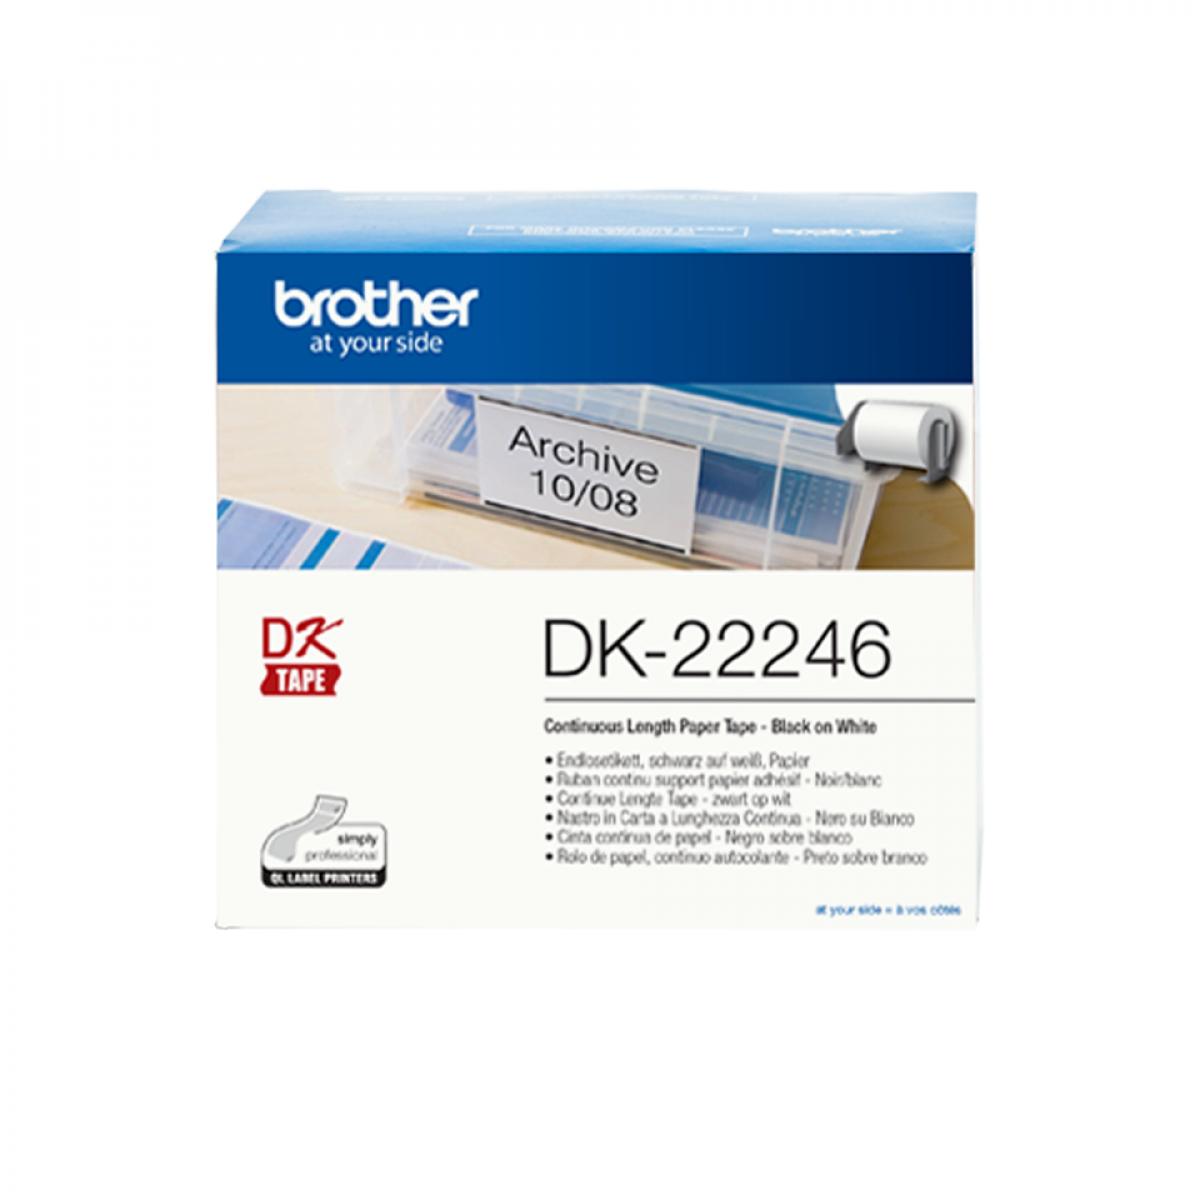 Ruban pour étiqueteuse Brother Brother DK-22246 label-making tape